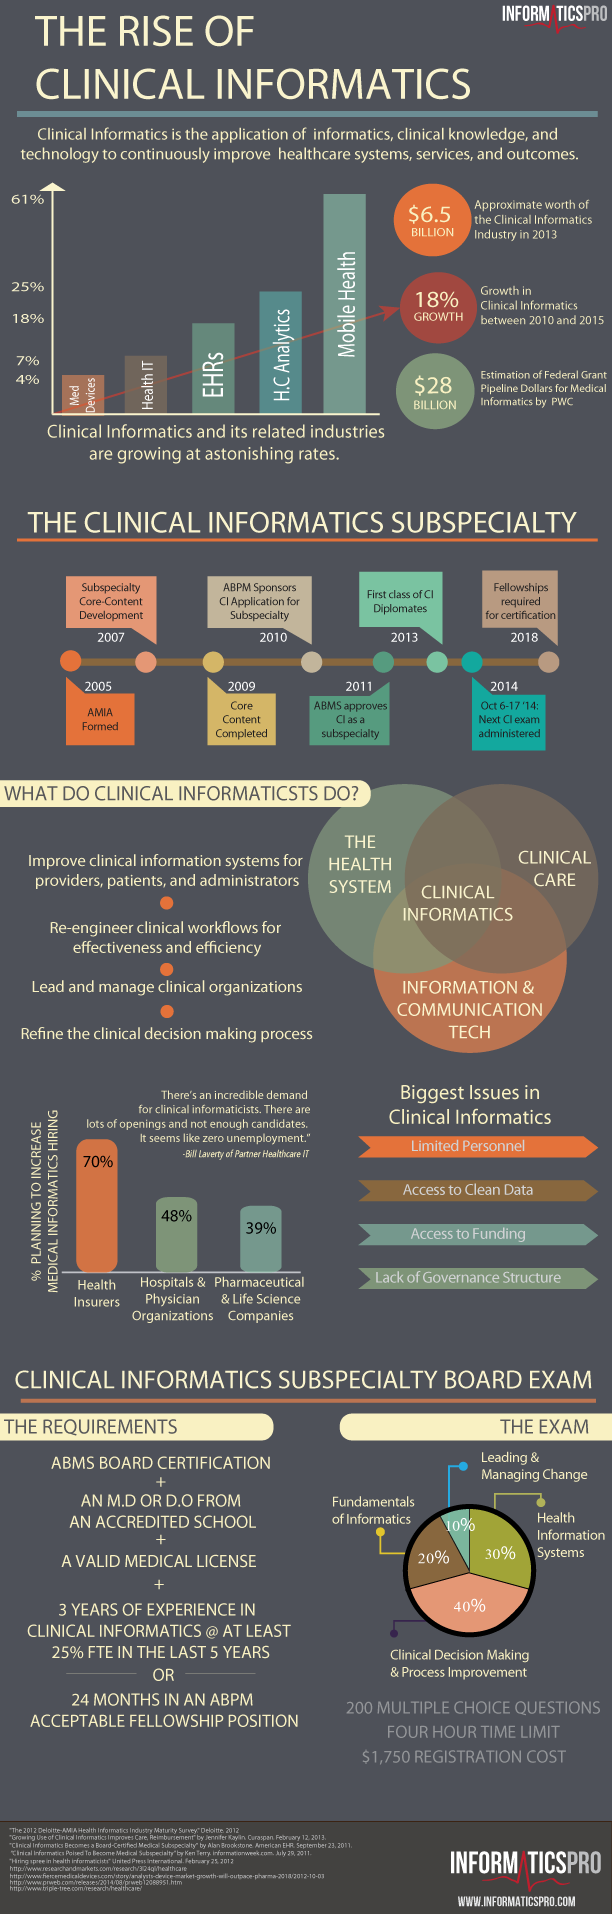 infographic_clinical_informatics_rise